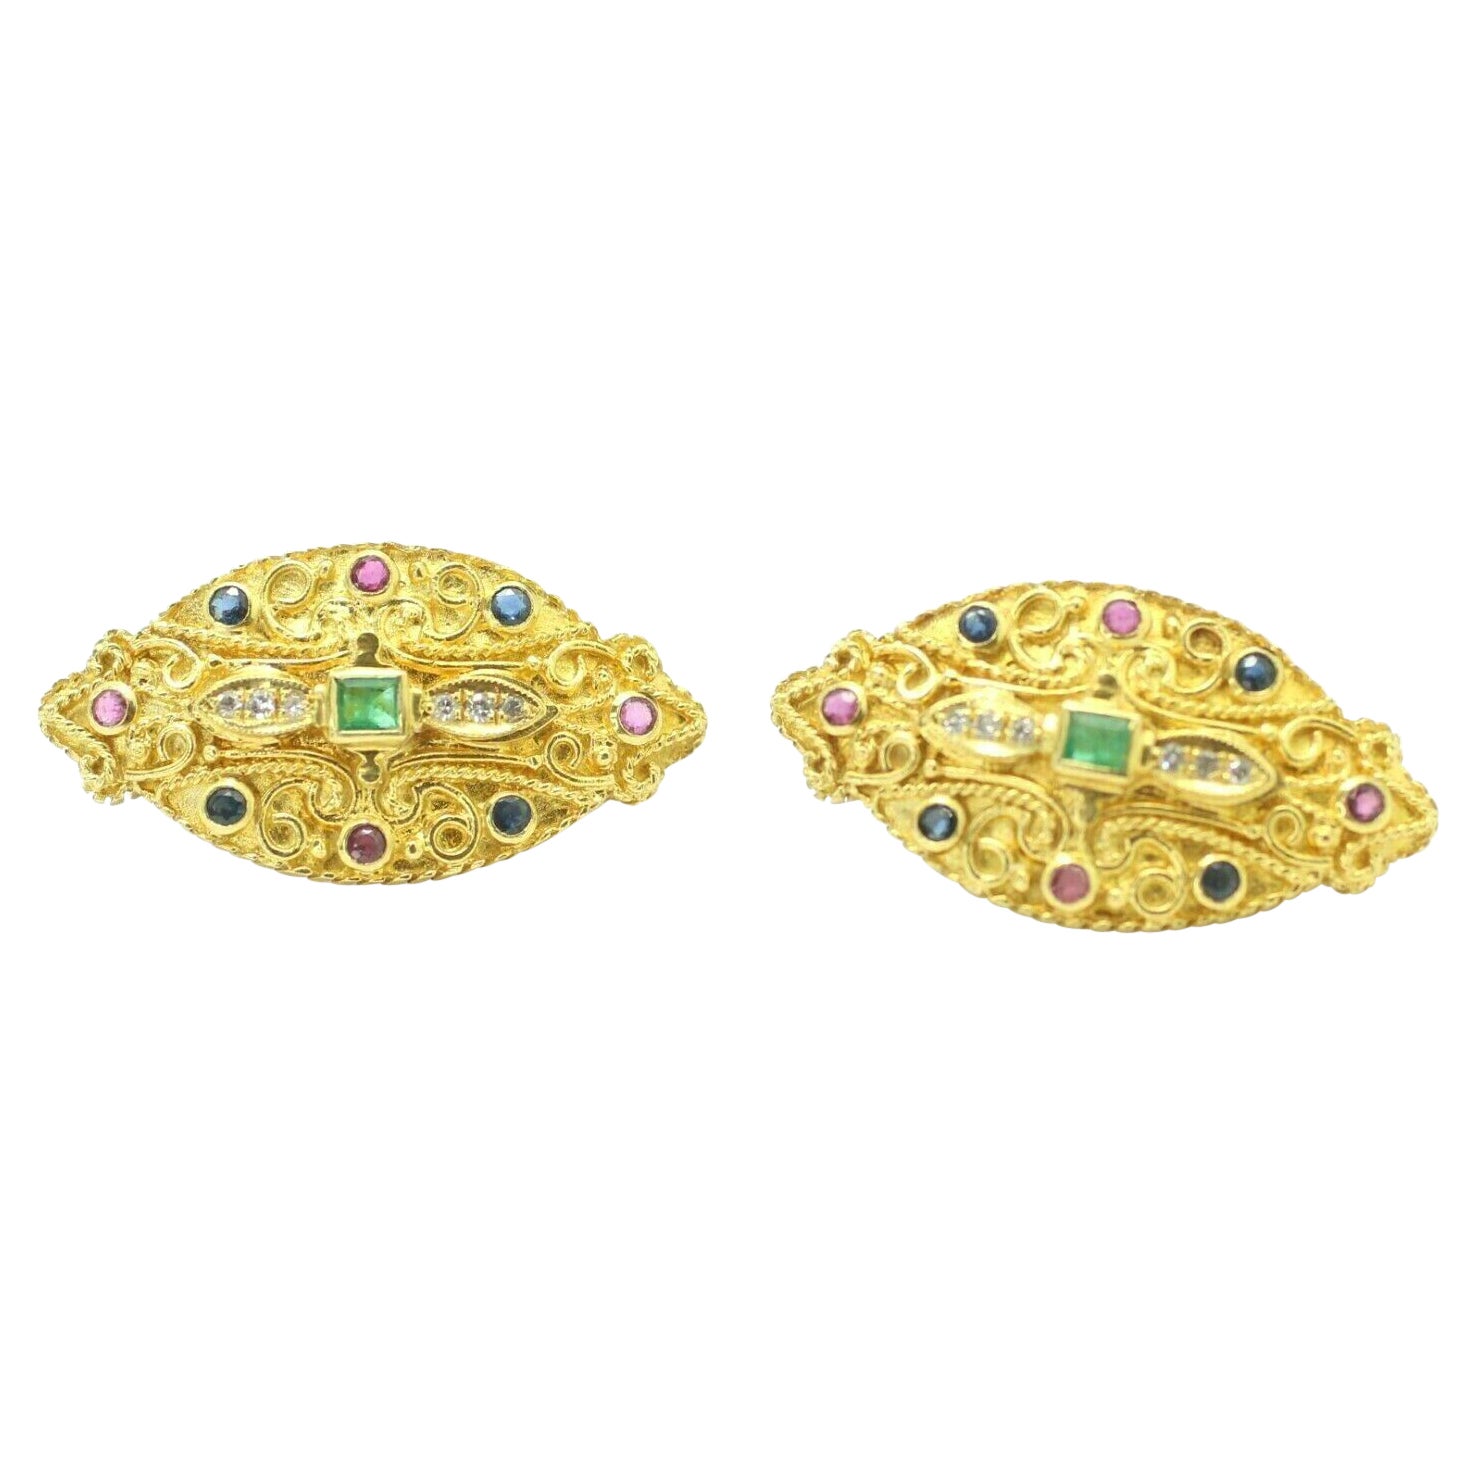 Estate Vintage Gemstones and Diamond Clip on Earrings in 18k Yellow Gold